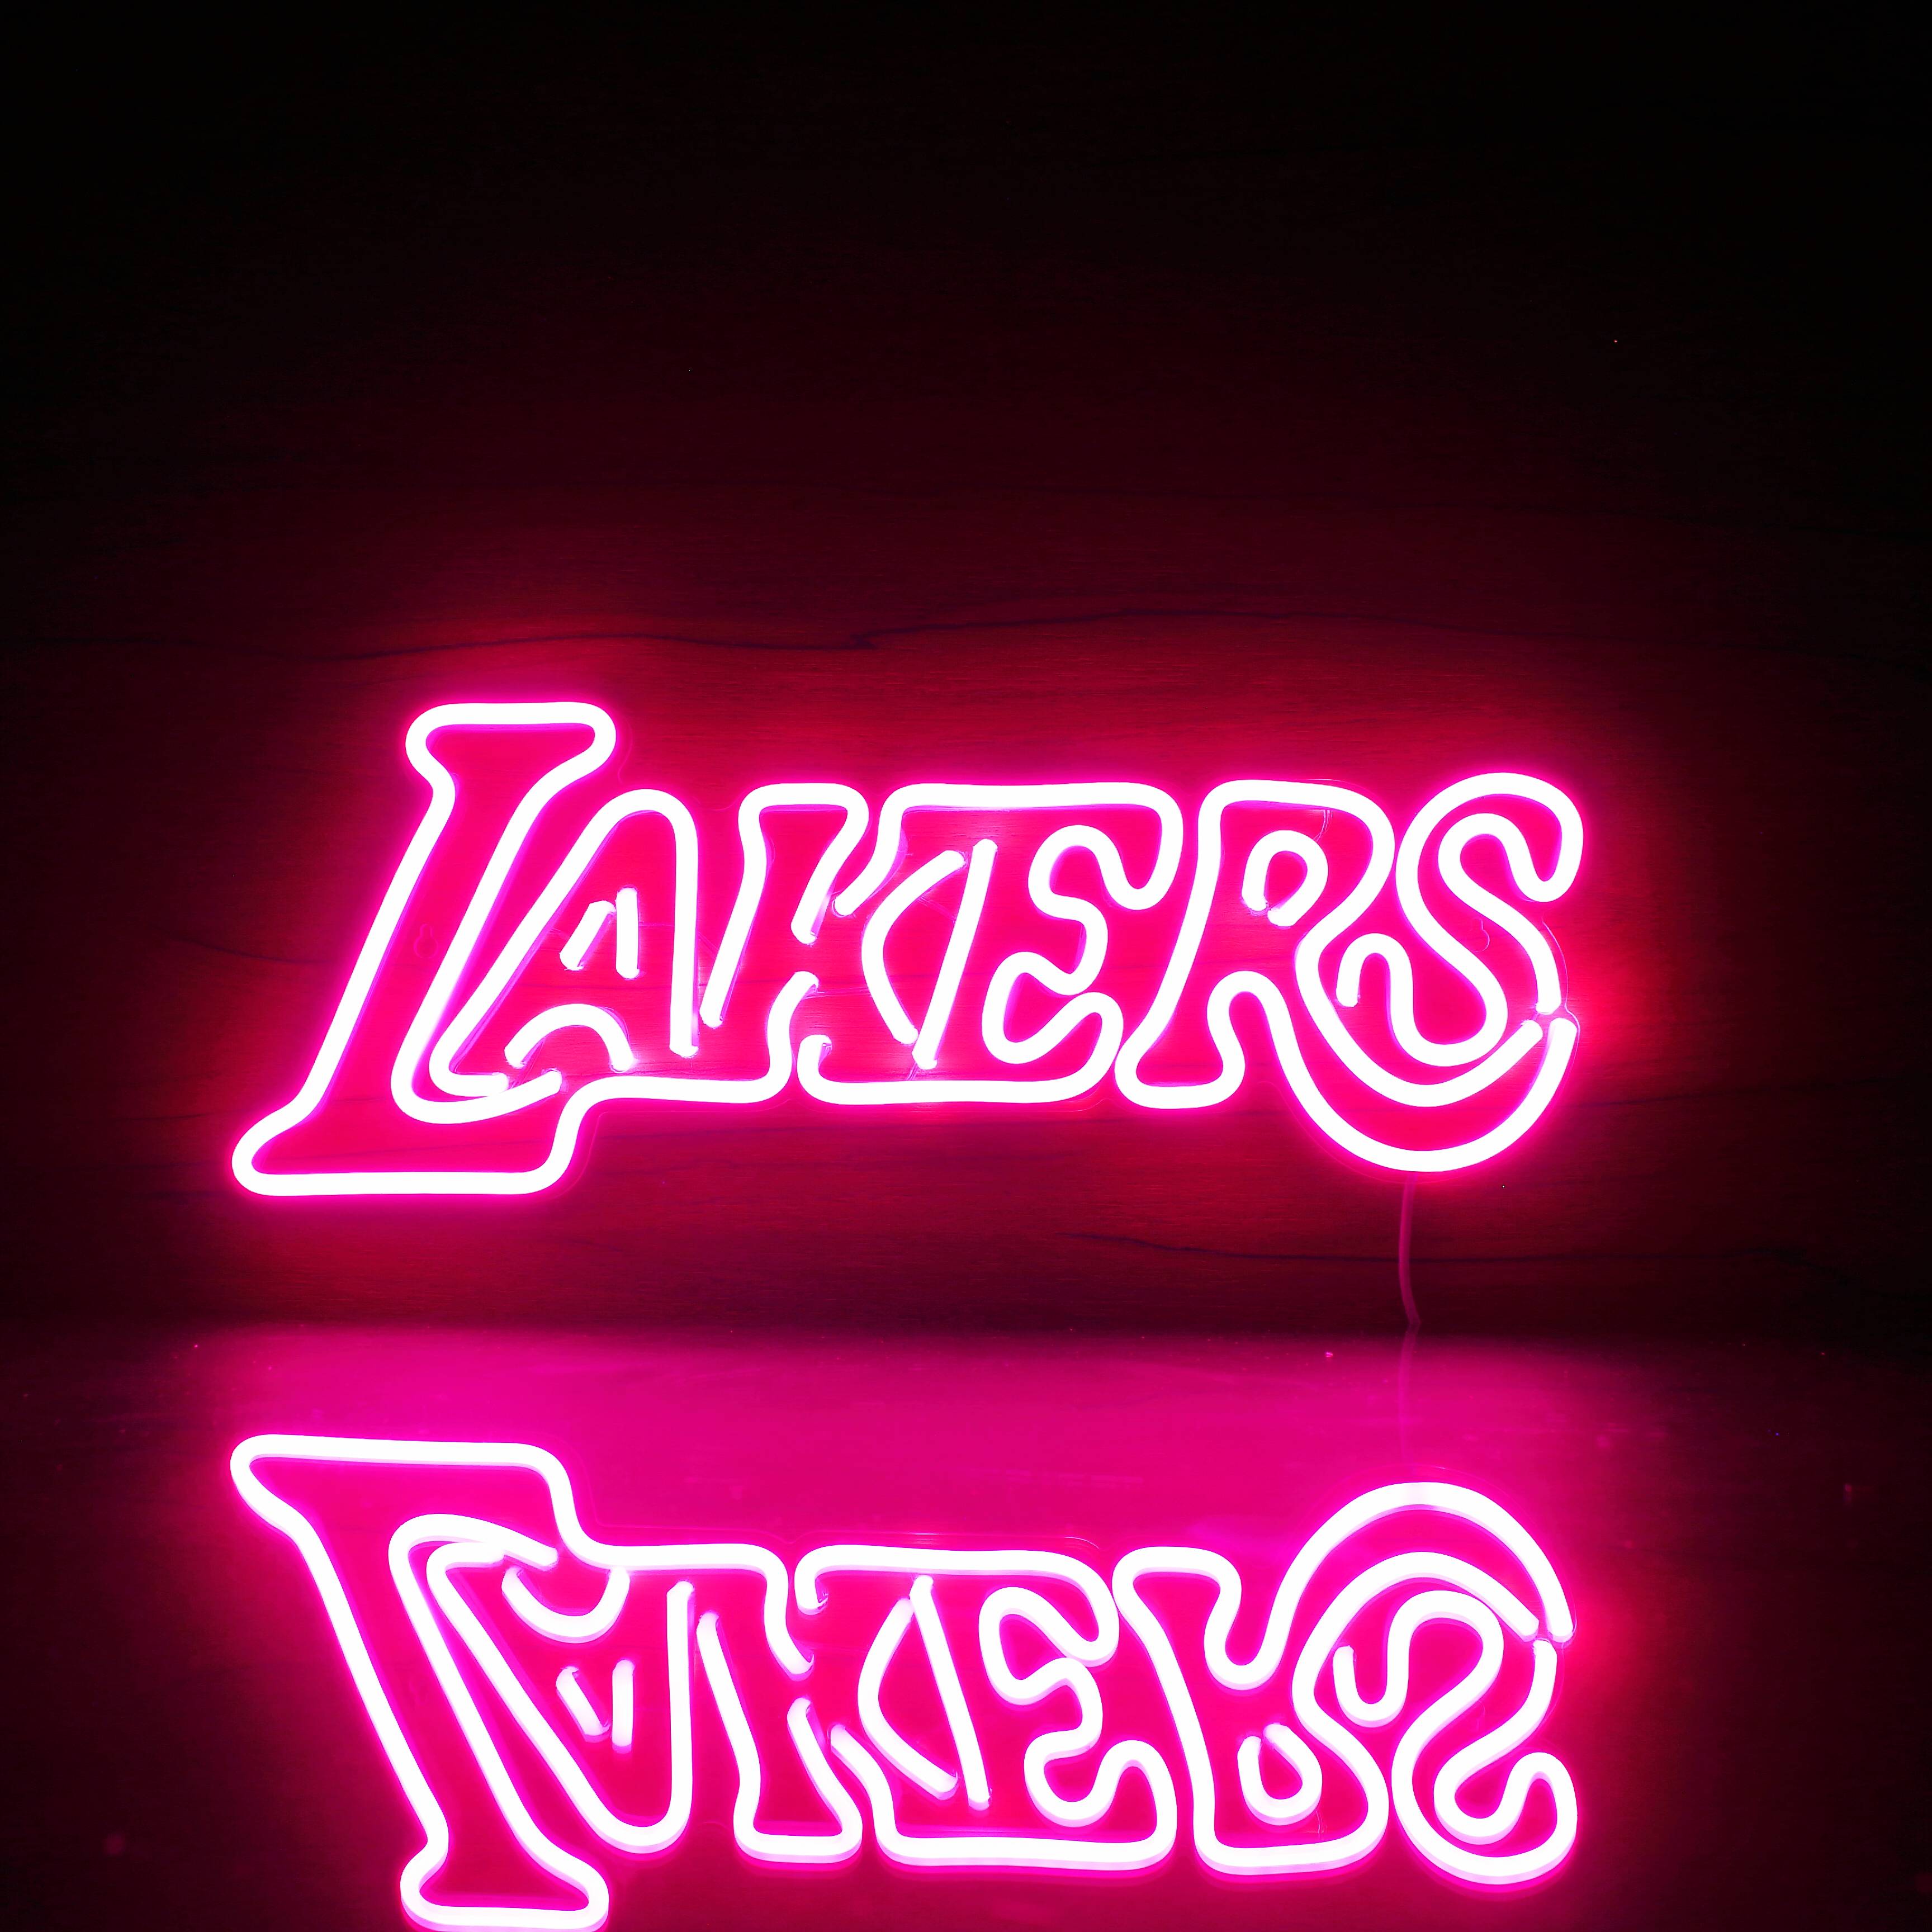 Los Angeles Lakers Handmade Neon Flex LED Sign. PRO LED SIGN